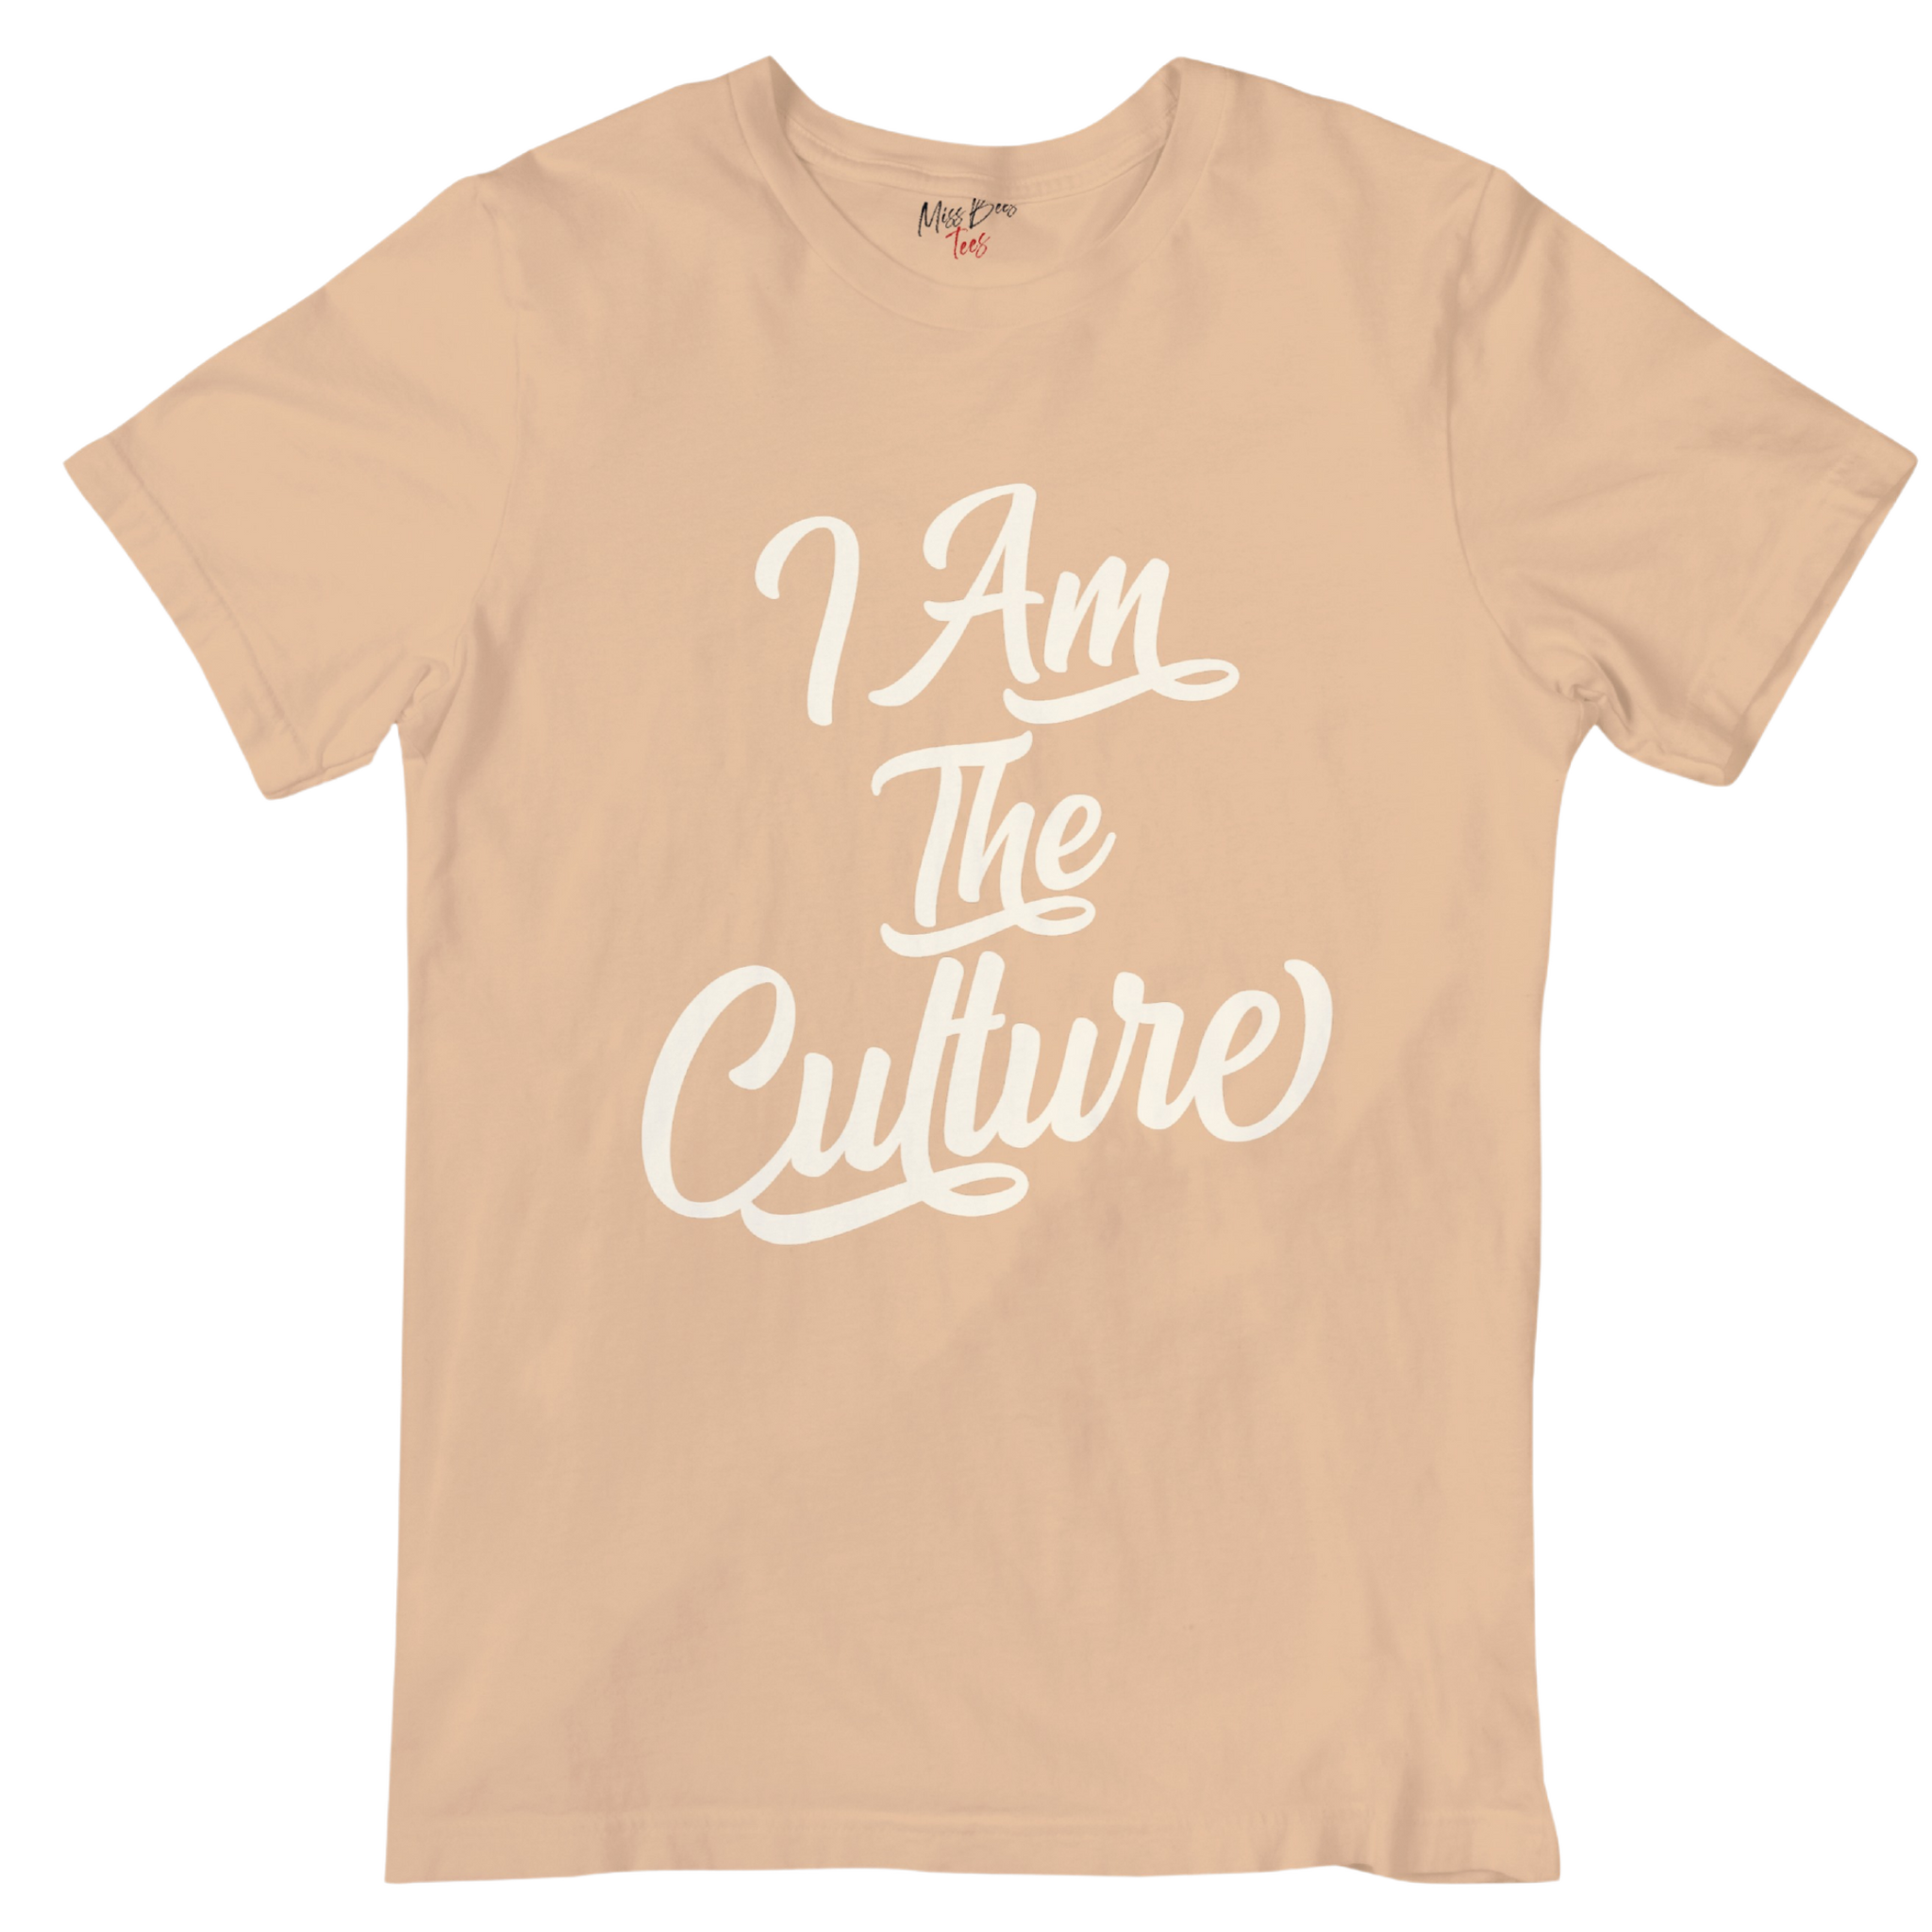 I Am the Culture tee